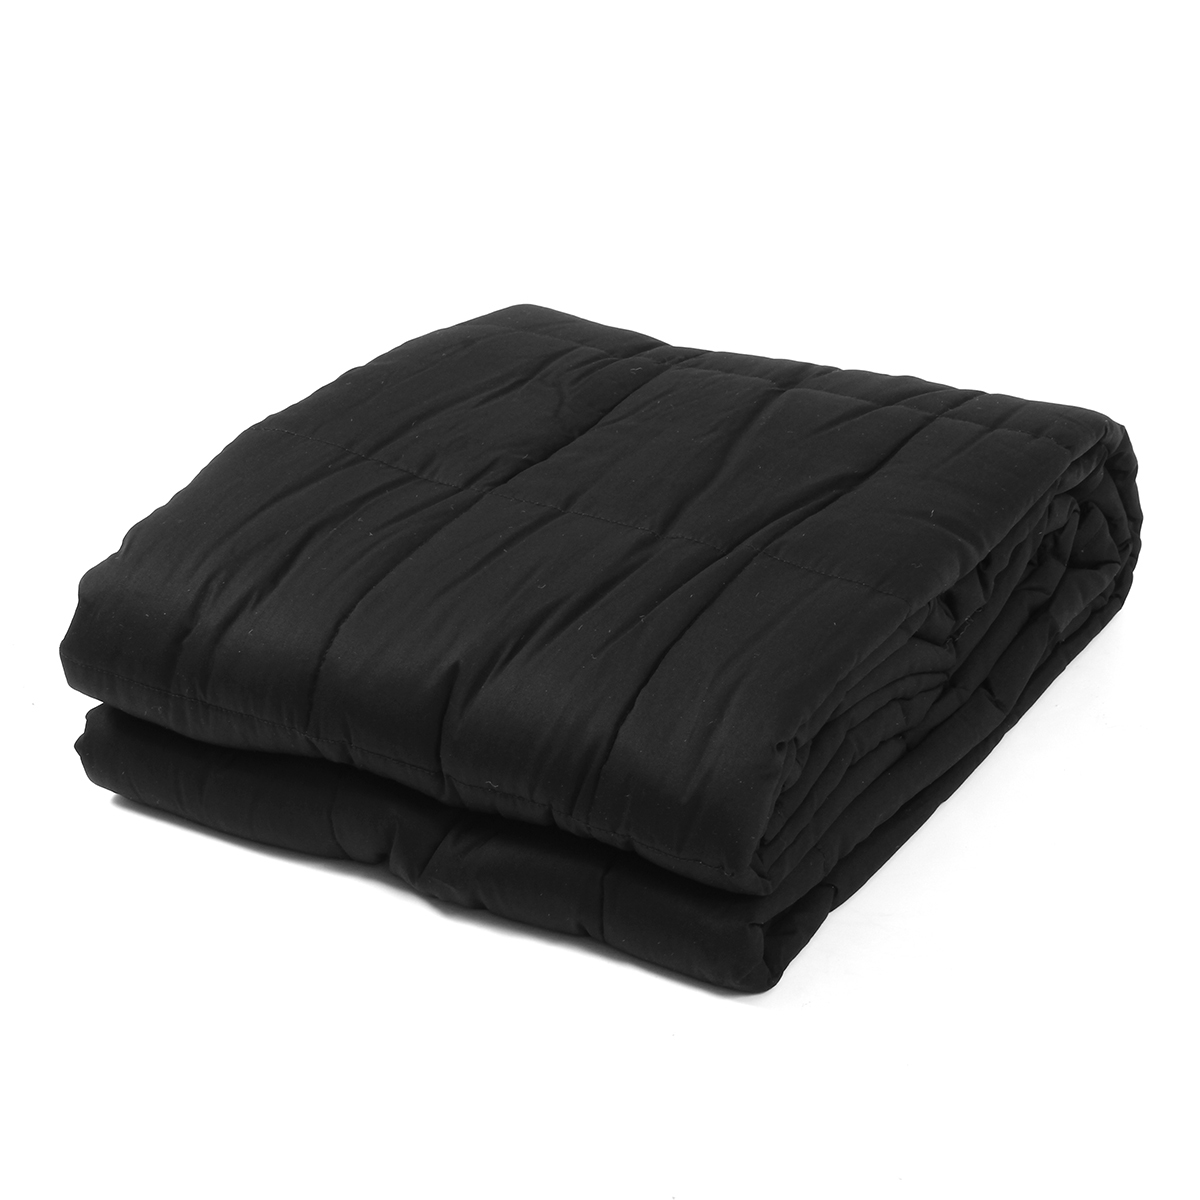 100x150CM-Weighted-Cotton-Blanket-Heavy-Sensory-Relax-45--7--95Kg-Black-Blankets-1349469-5